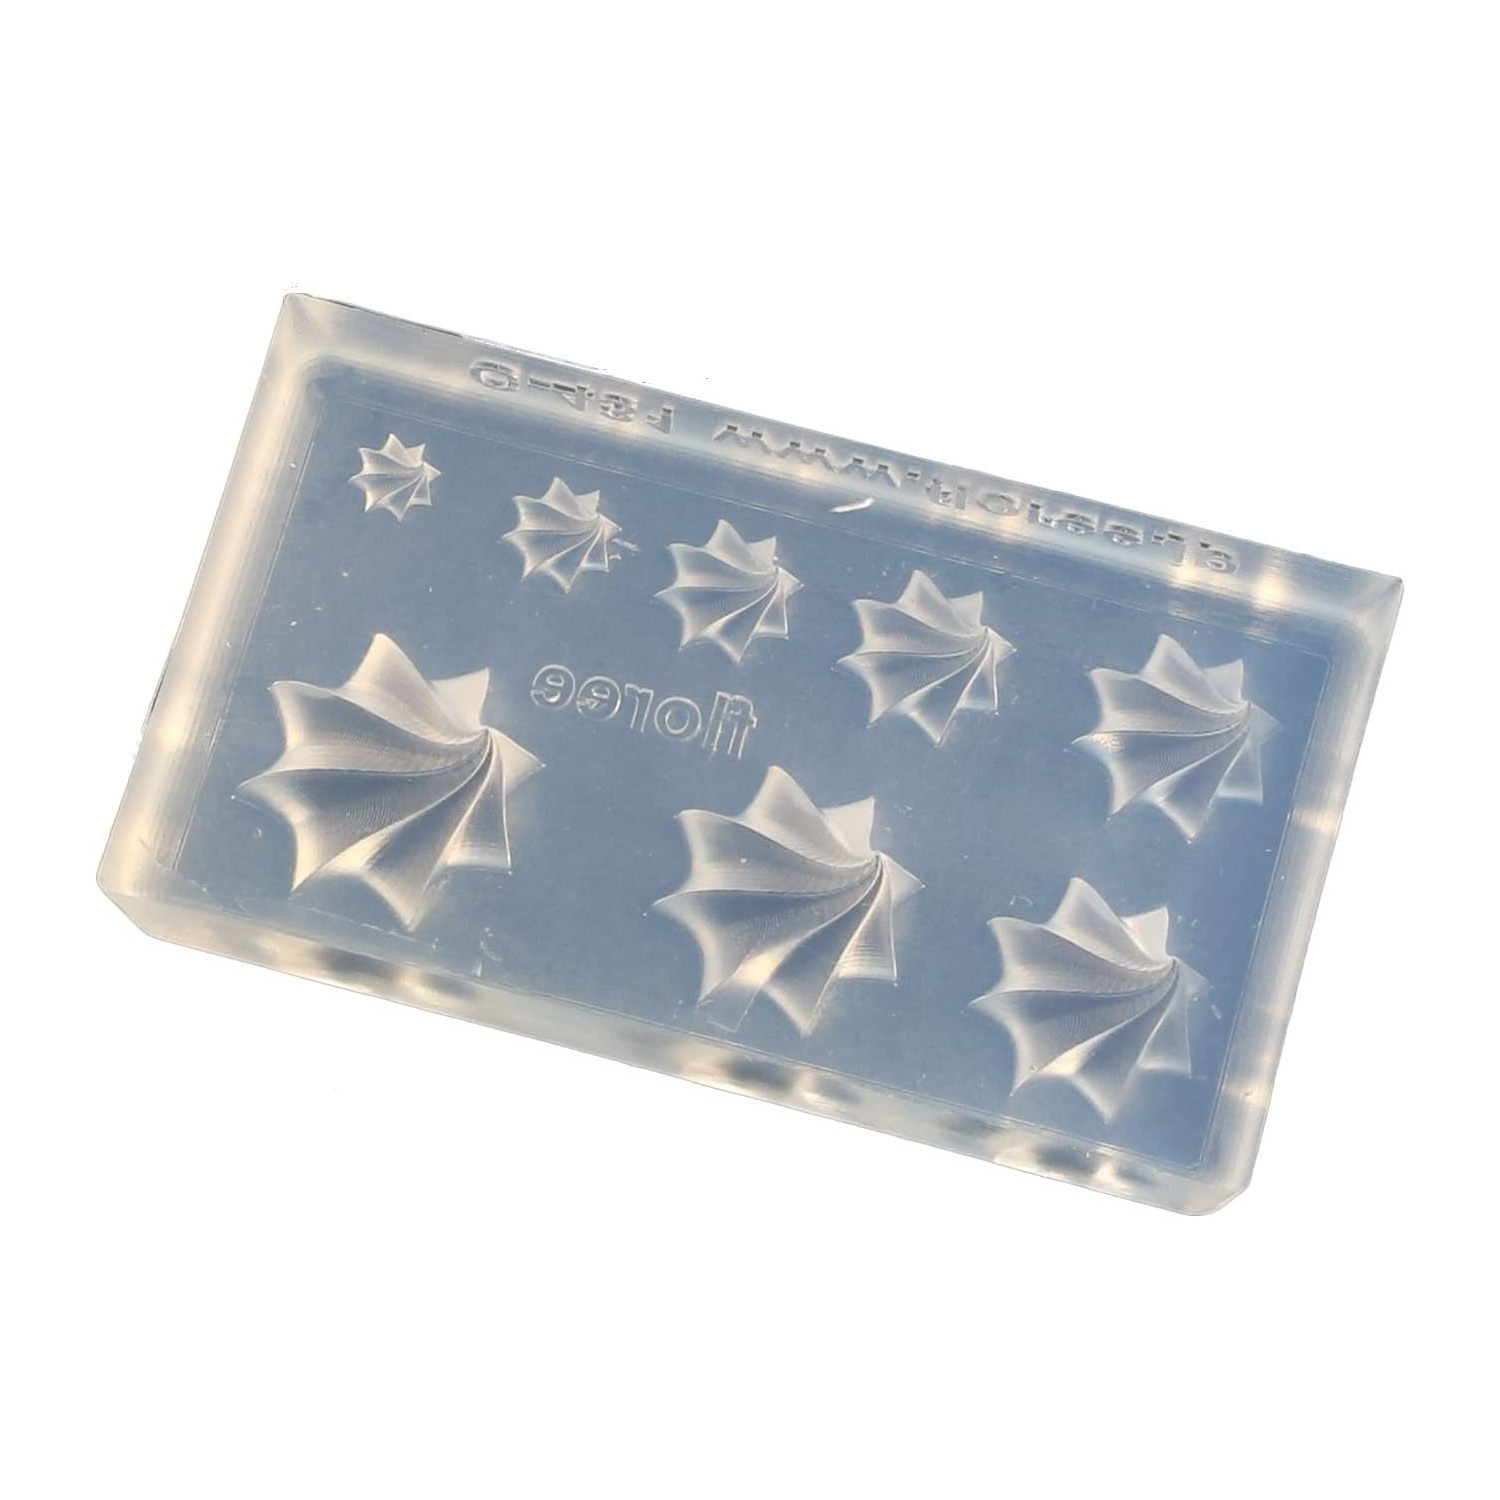 KAM-REJ-431  Resin Crafting Silicone Mold  (pcs)